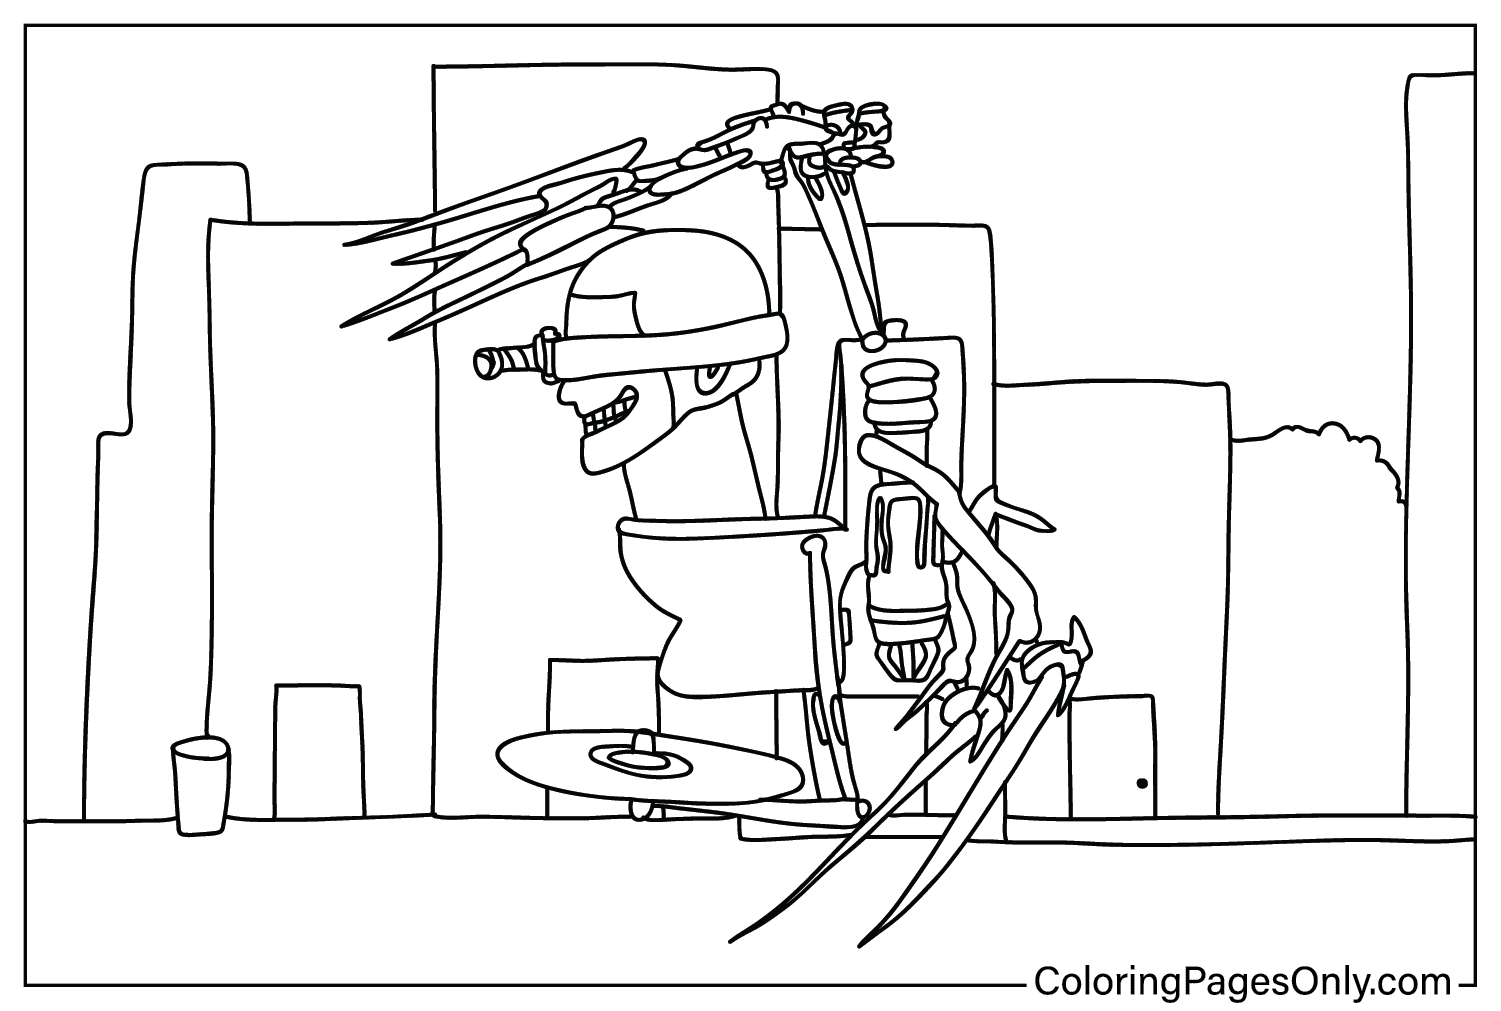 Coloring Page Dual Buzzsaw Mutant from Dual Buzzsaw Mutant